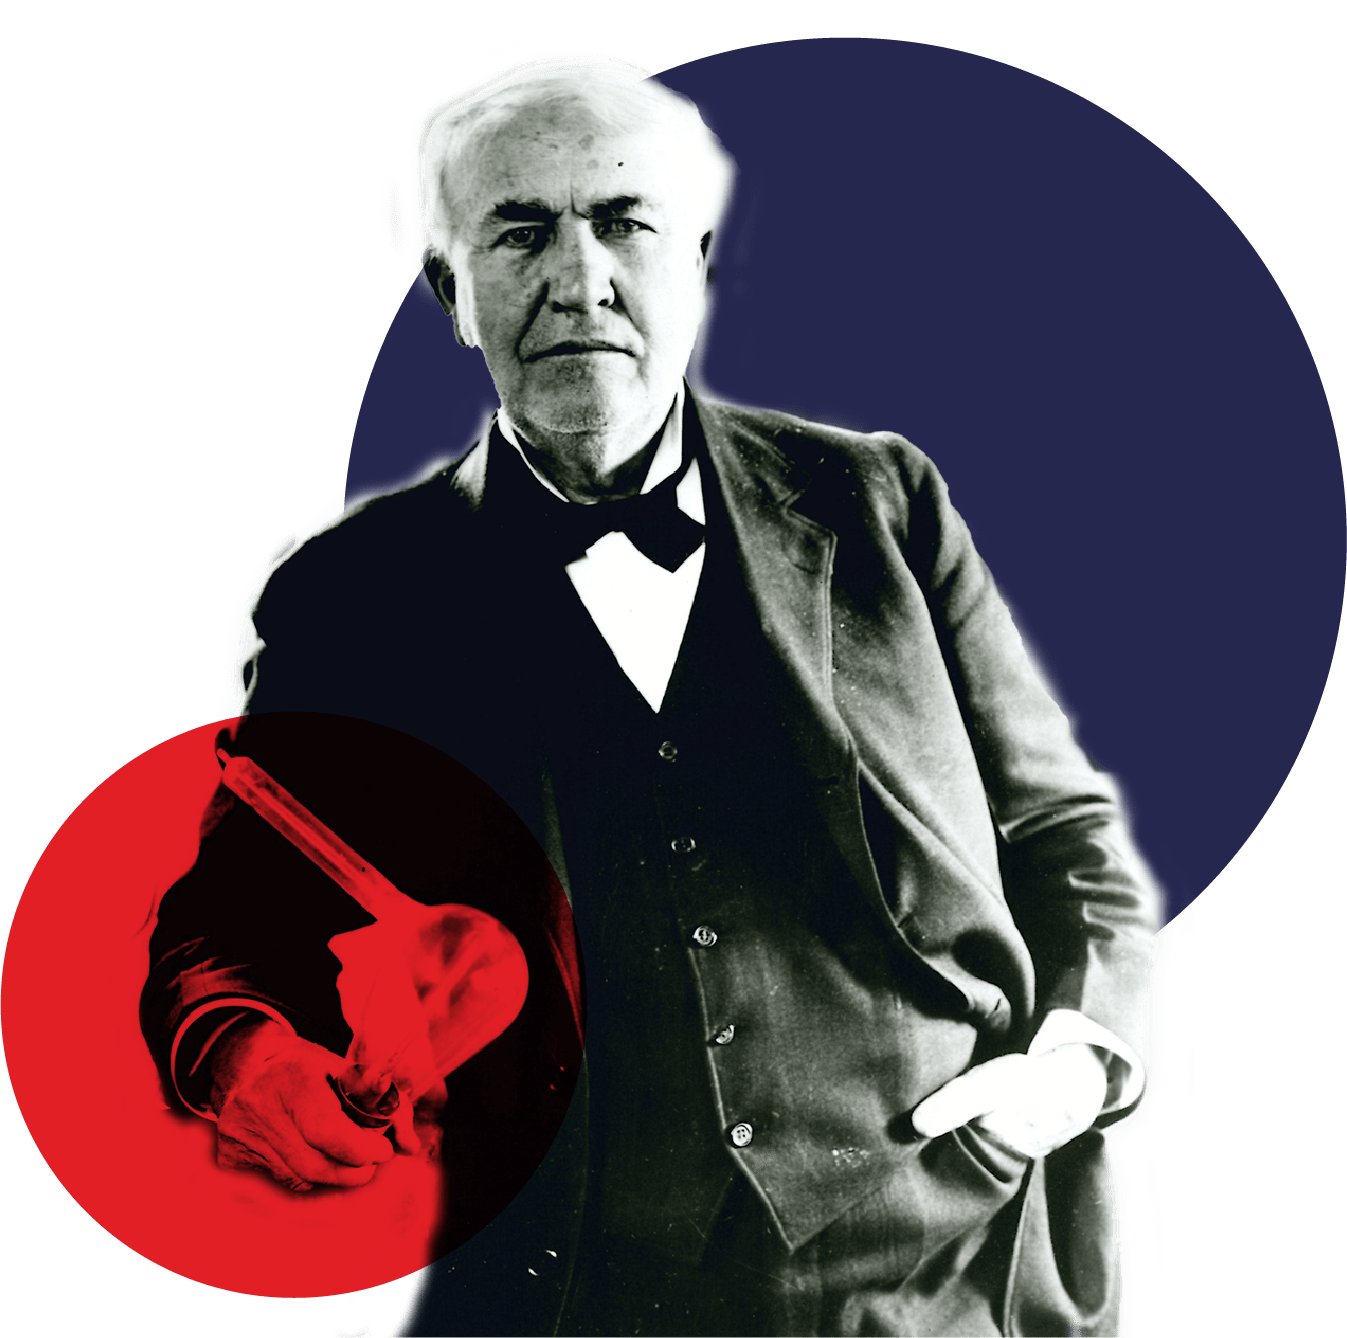 Composition of an old black and white photo of Edison with the brand blue and red circles.